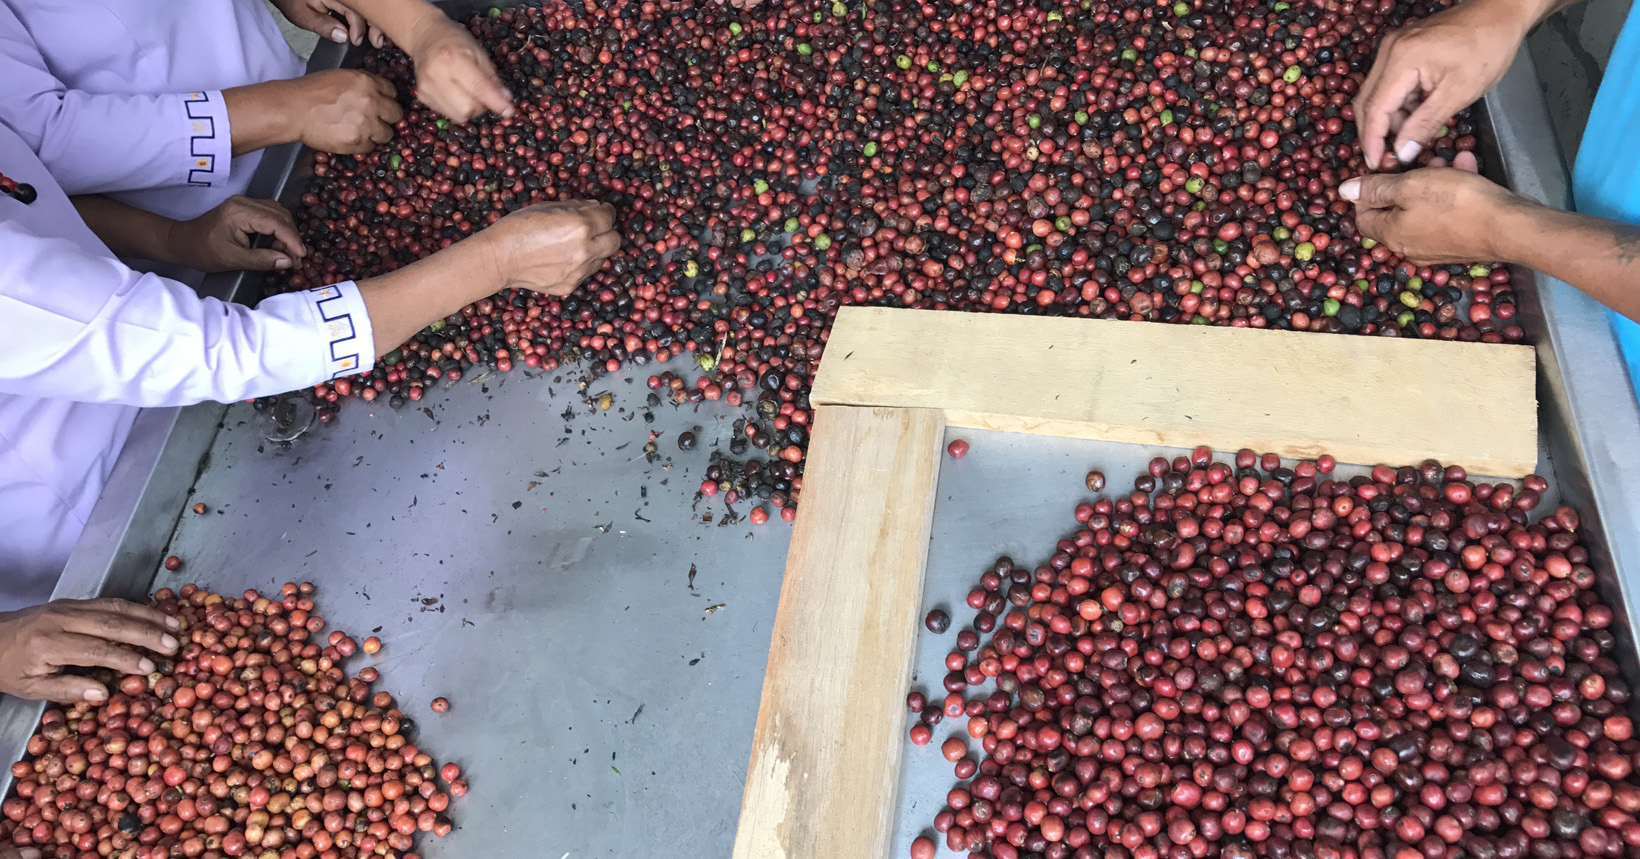 Multiple people hand sort coffee cherries based on size and color.